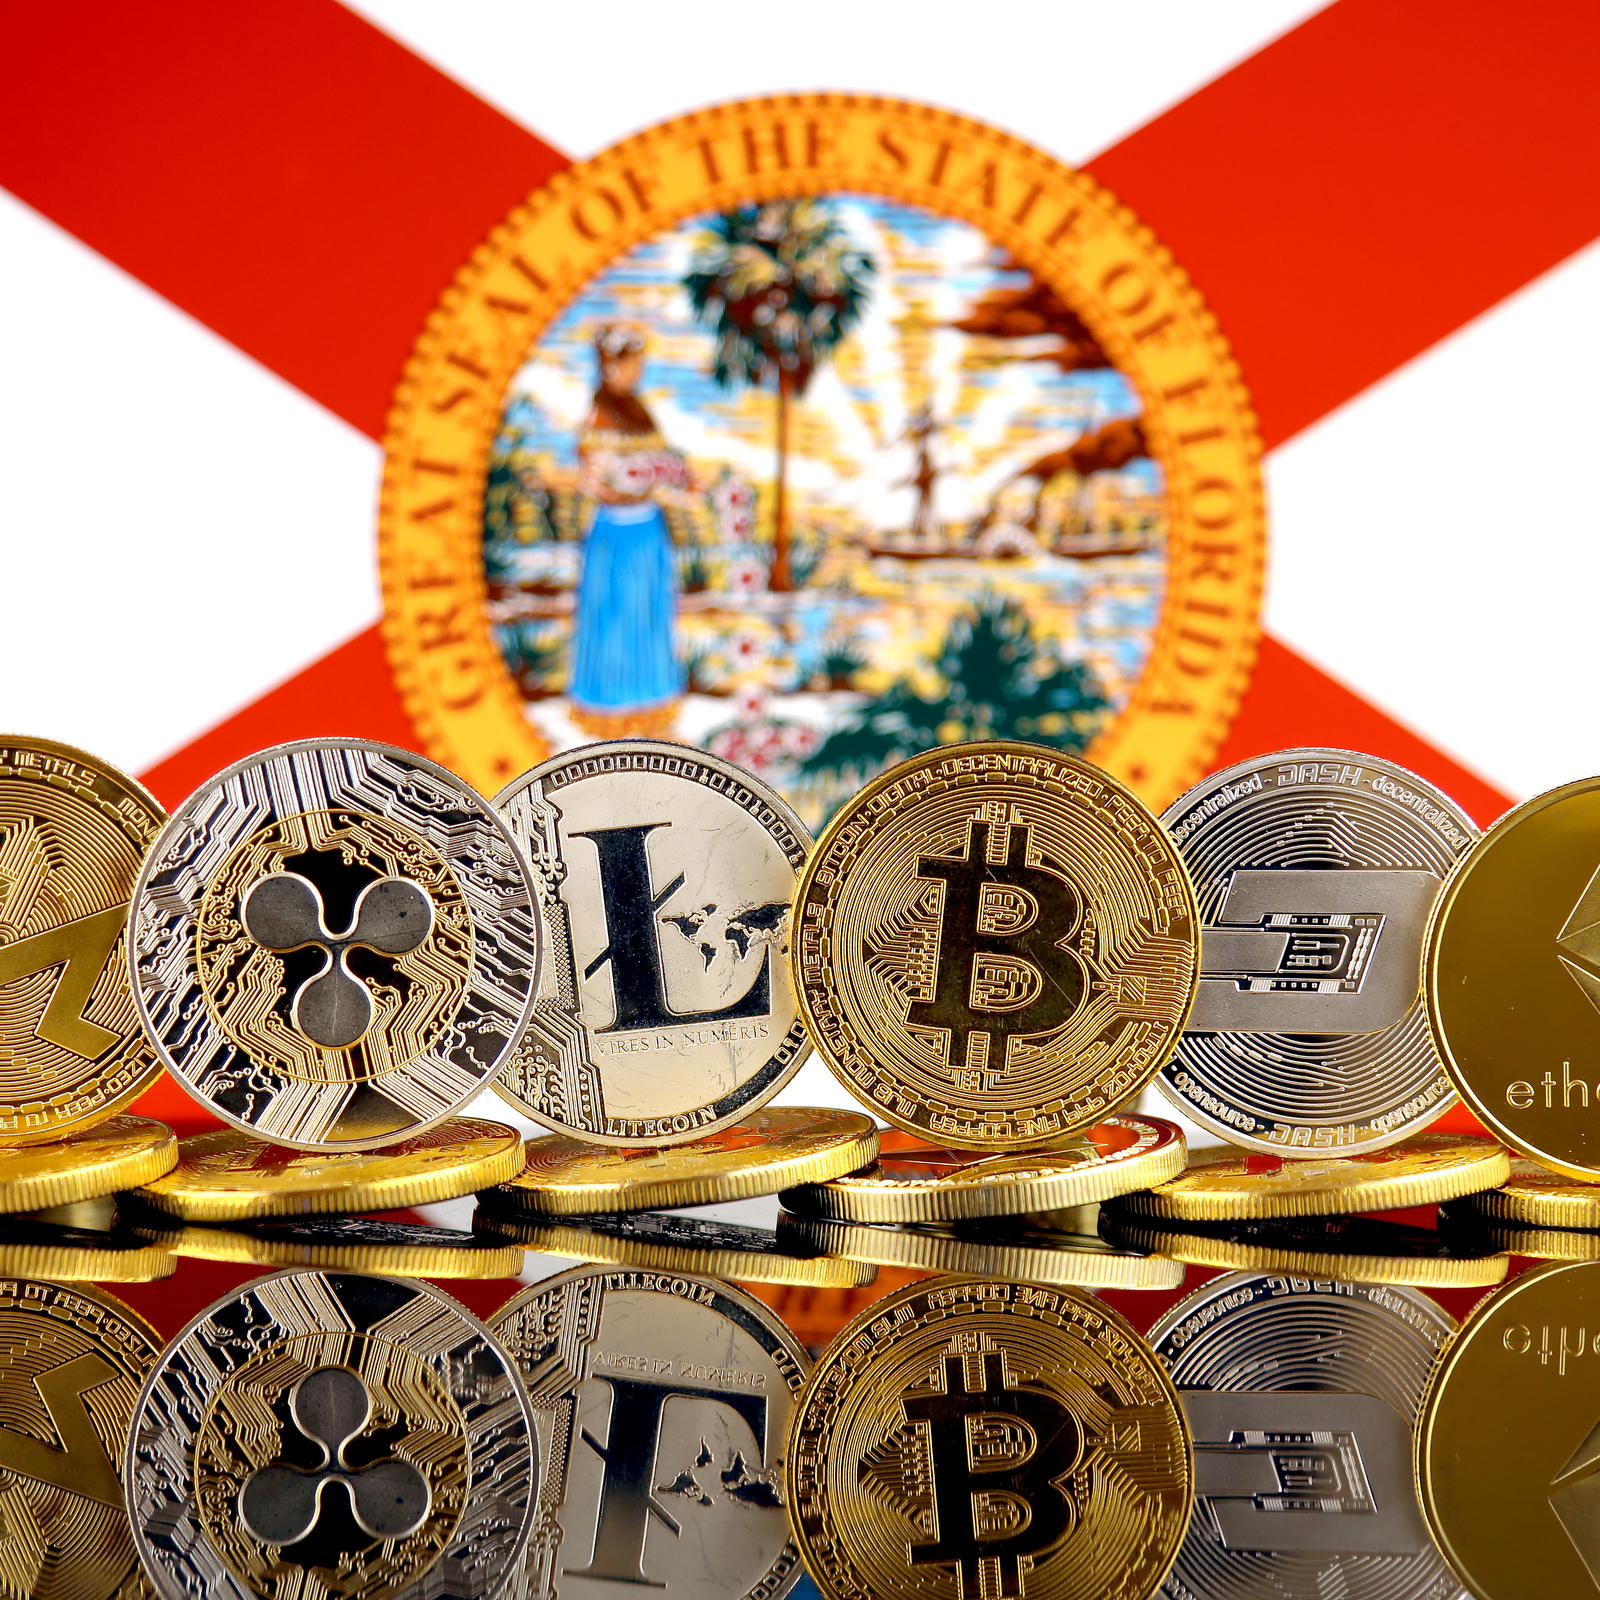 Florida CFO Advocates Creation of State “Cryptocurrency Chief”